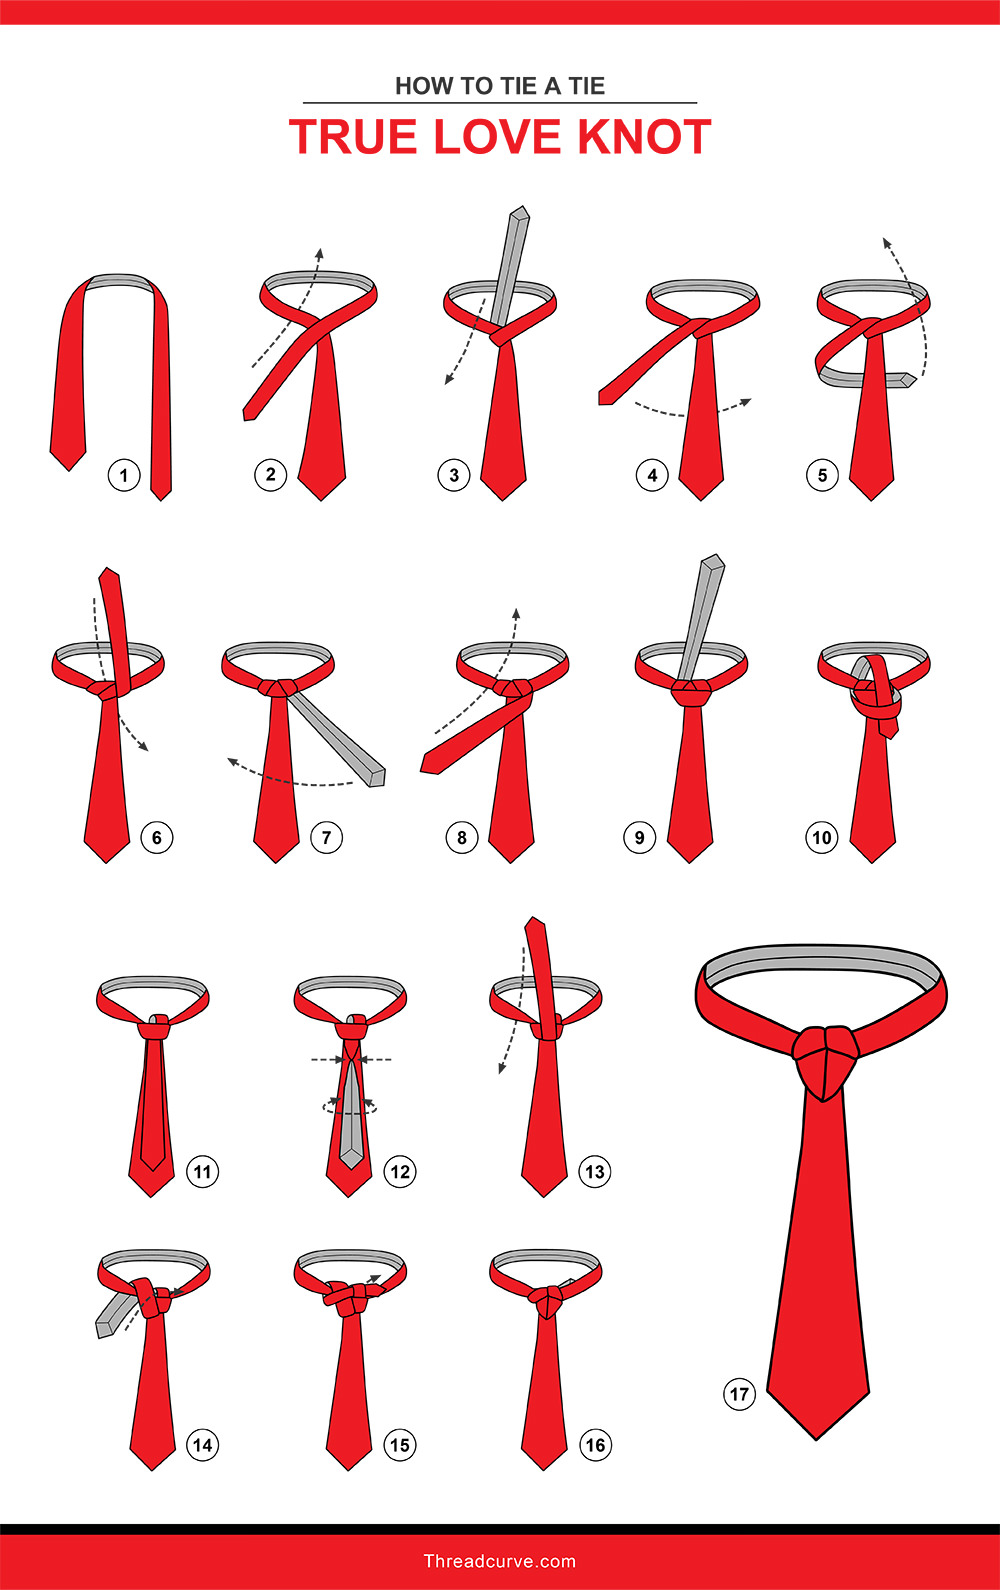 How to tie a true love knot (illustration)